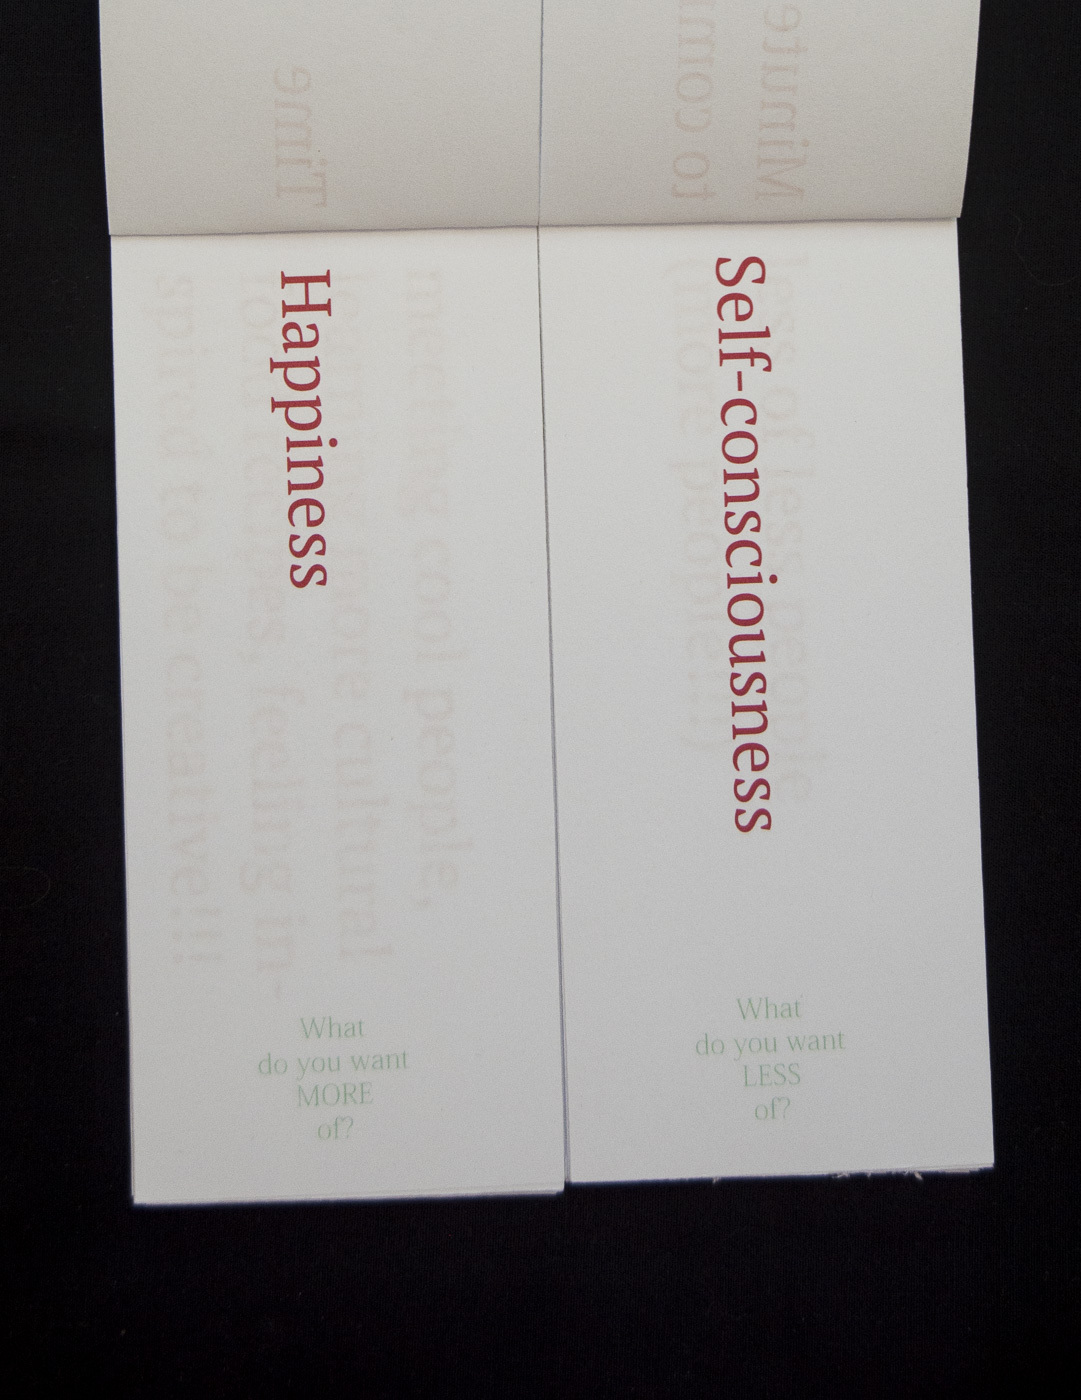 two side by side slips of paper that say "Happiness" and "Self-consciousness"